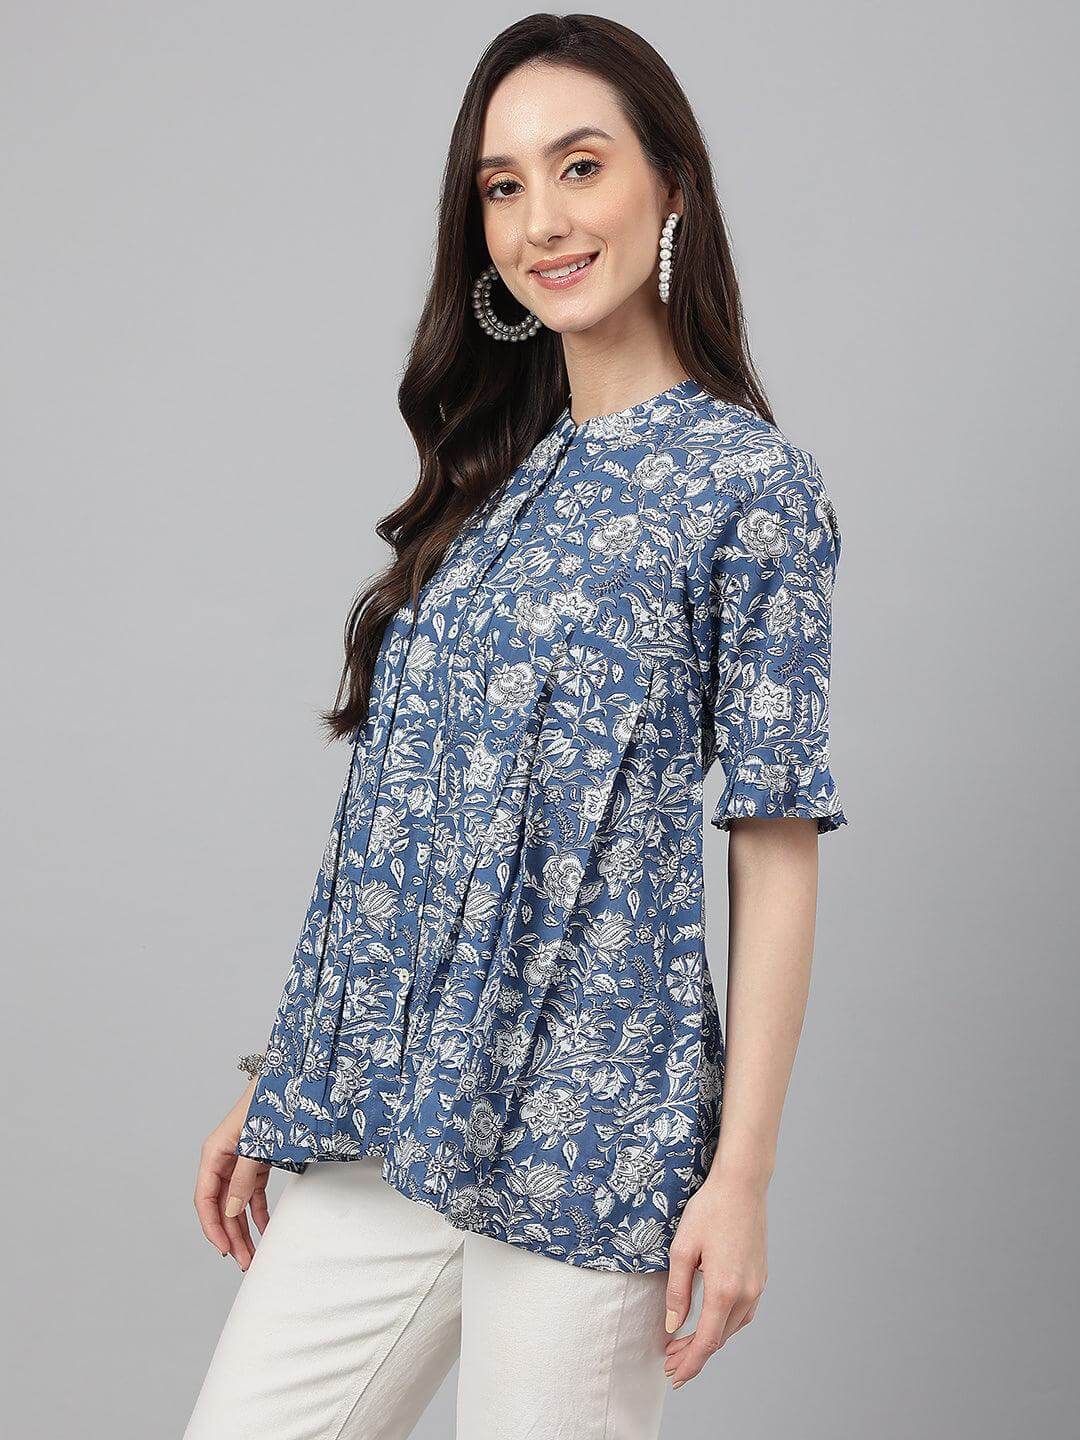 Ink Blue Cotton Floral Print Flared Top